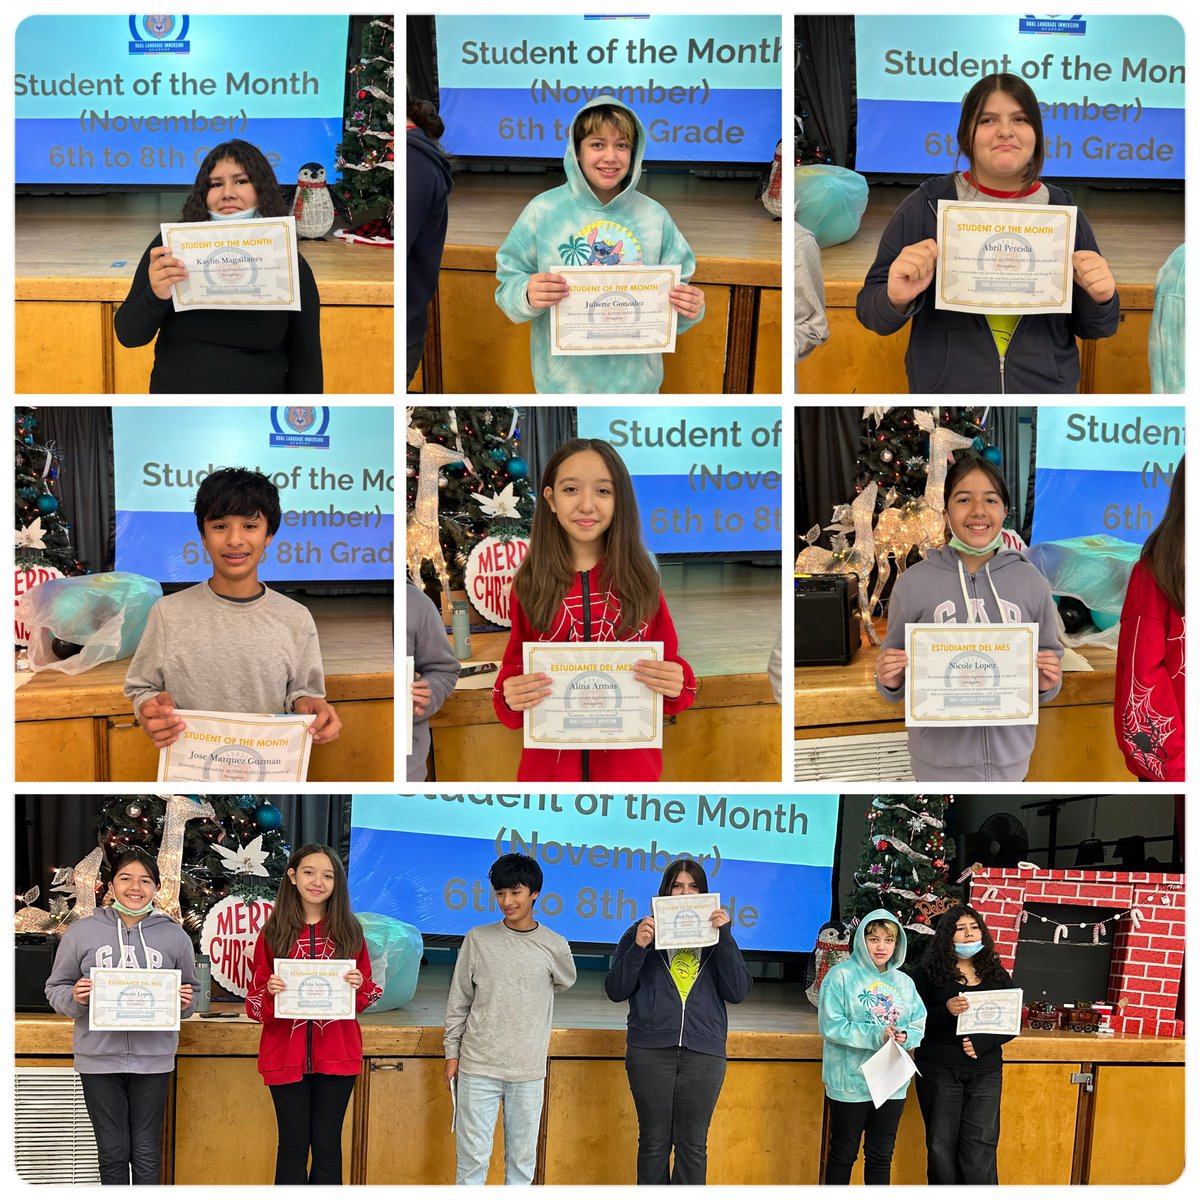 '🌟 Huge congrats to our outstanding middle schoolers recognized as November Students of the Month for embracing safety first! 🚀 Your commitment to creating a secure environment sets a stellar example. Keep shining bright, stars! 🌈👏 #SafetyChampions #StudentsoftheMonth